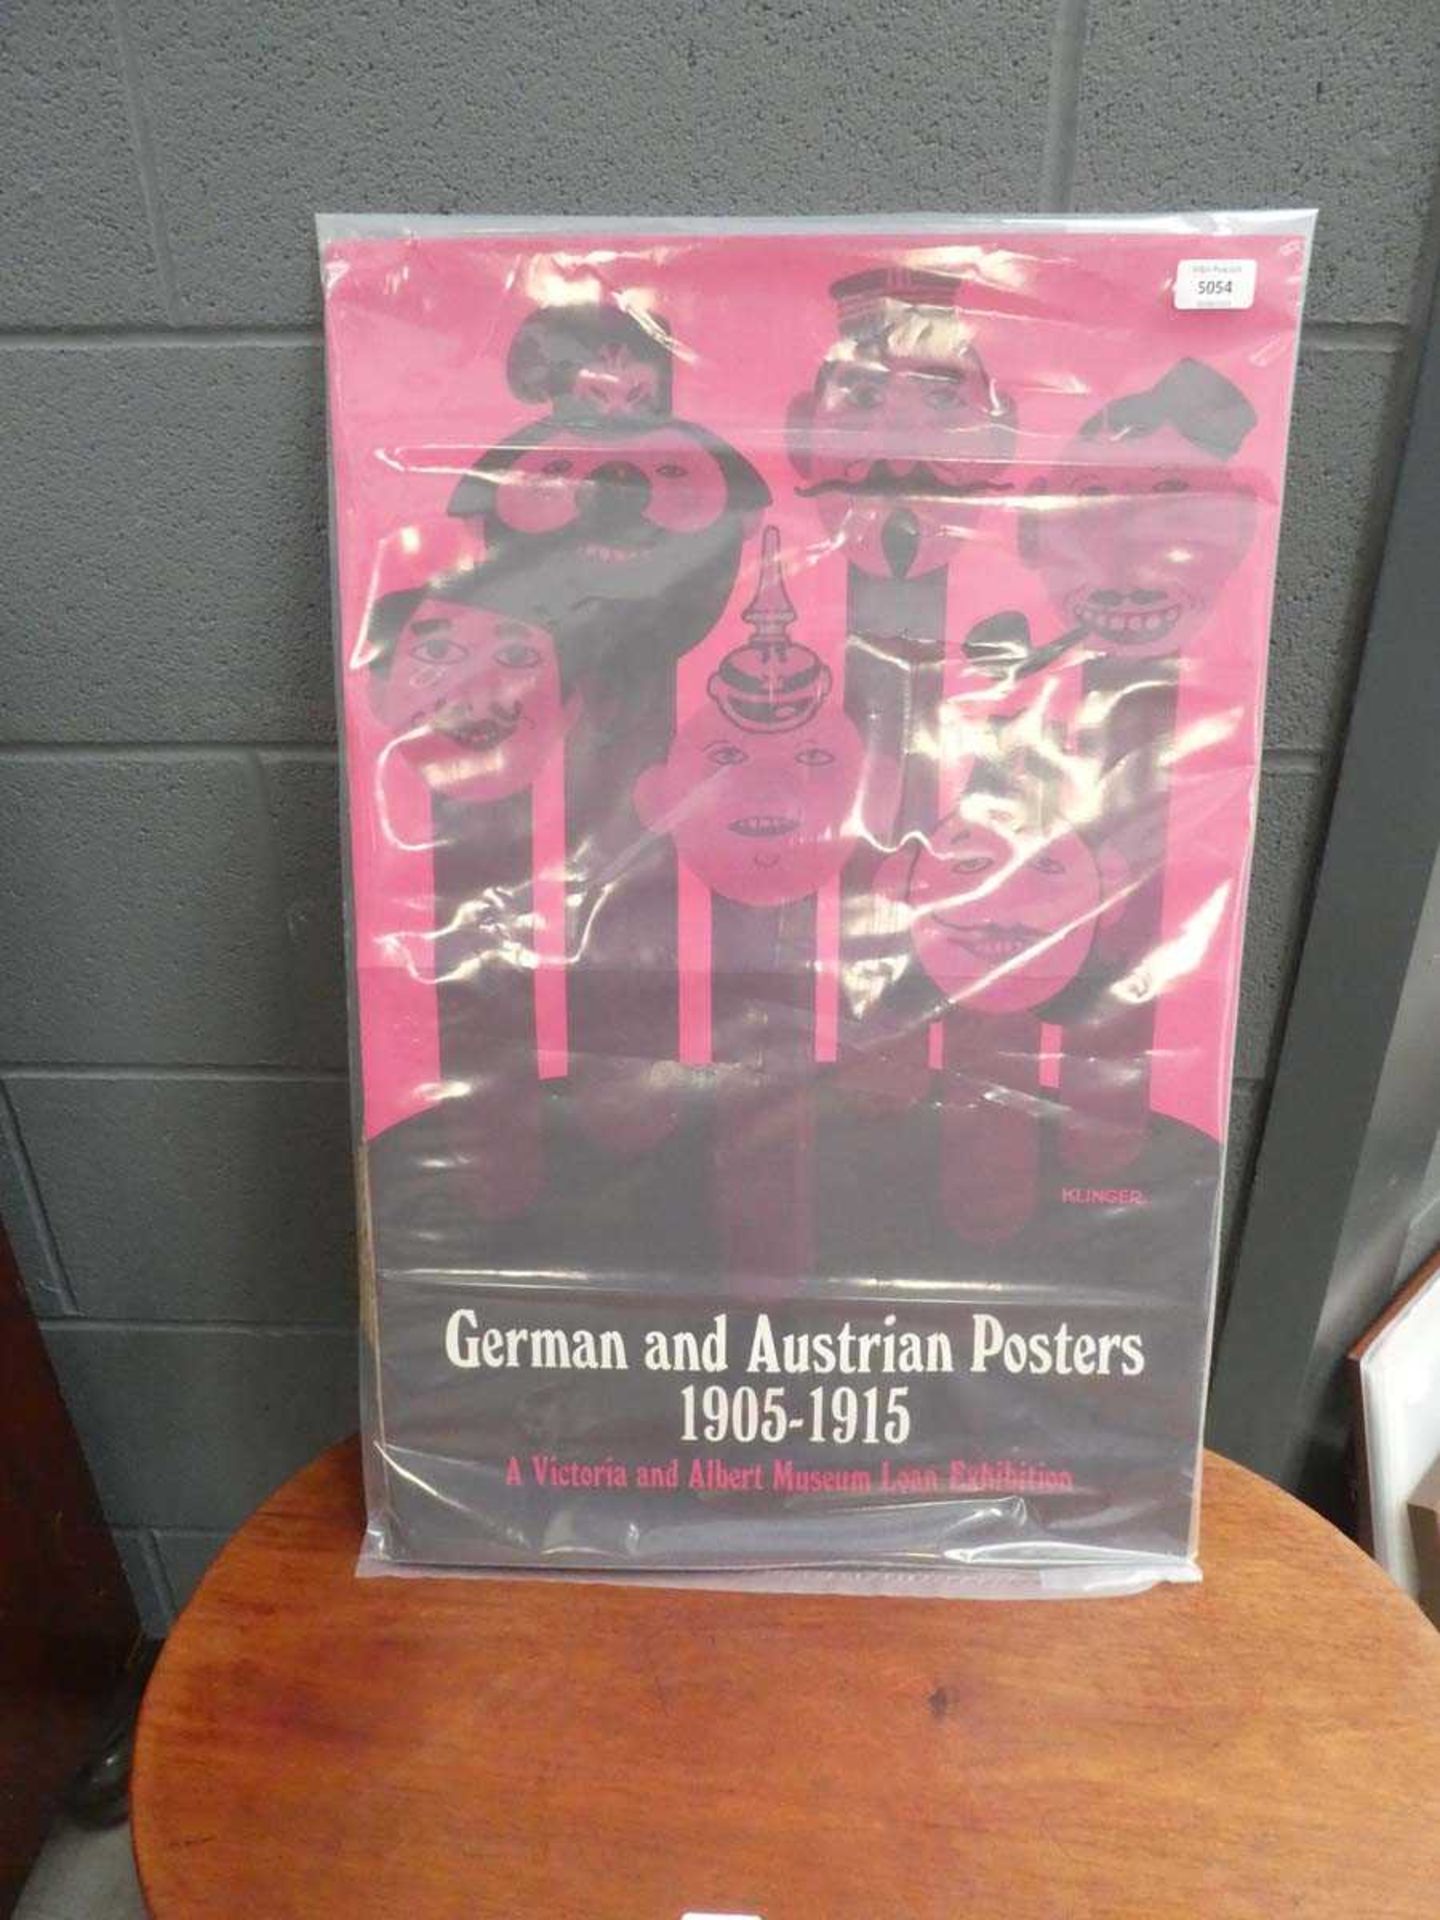 'German and Austrian Posters 1905-1915, A Victorian and Albert Museum Loan Exhibiton' poster,